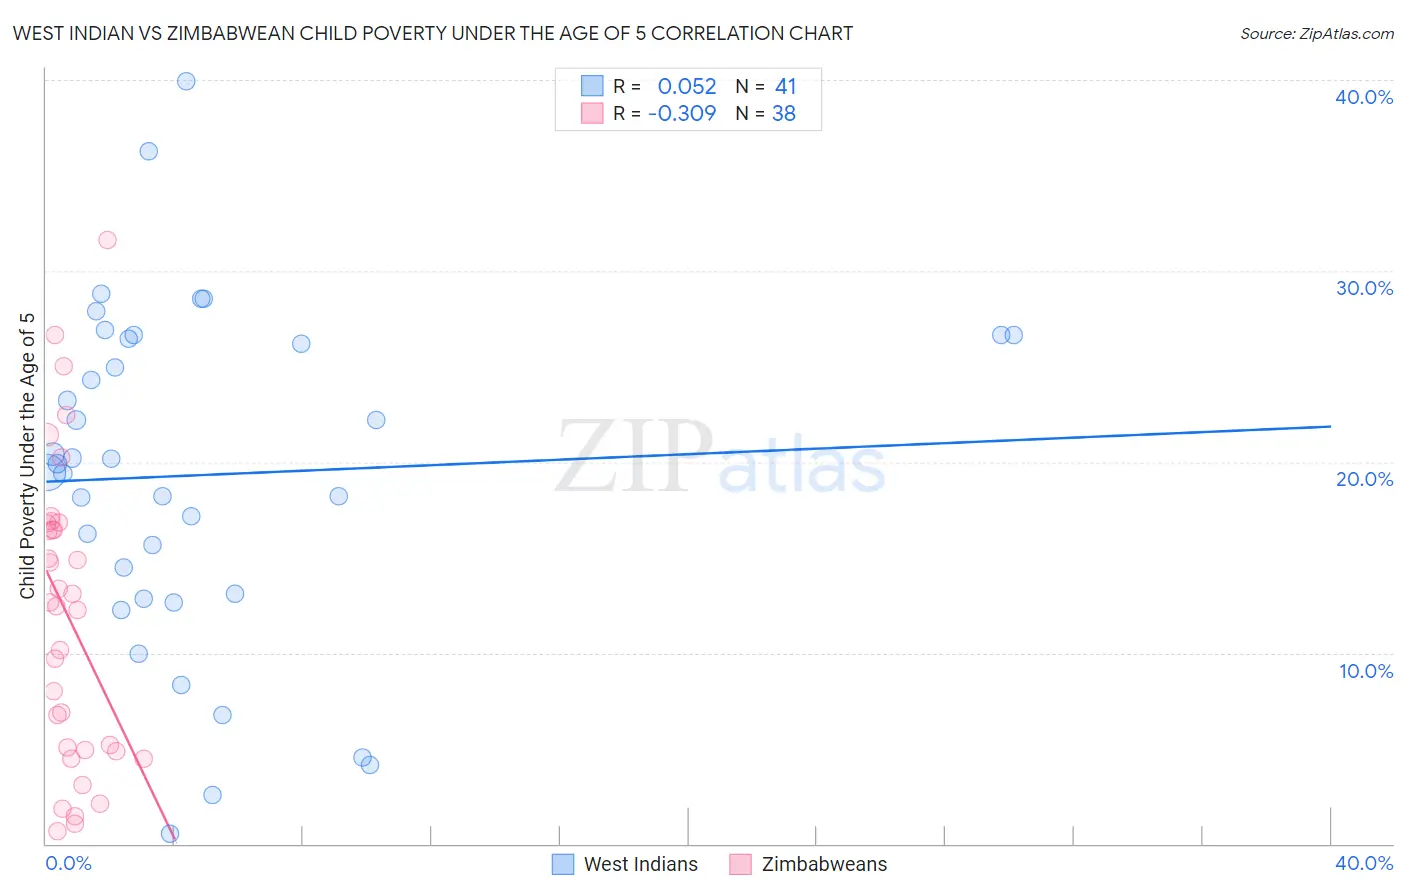 West Indian vs Zimbabwean Child Poverty Under the Age of 5